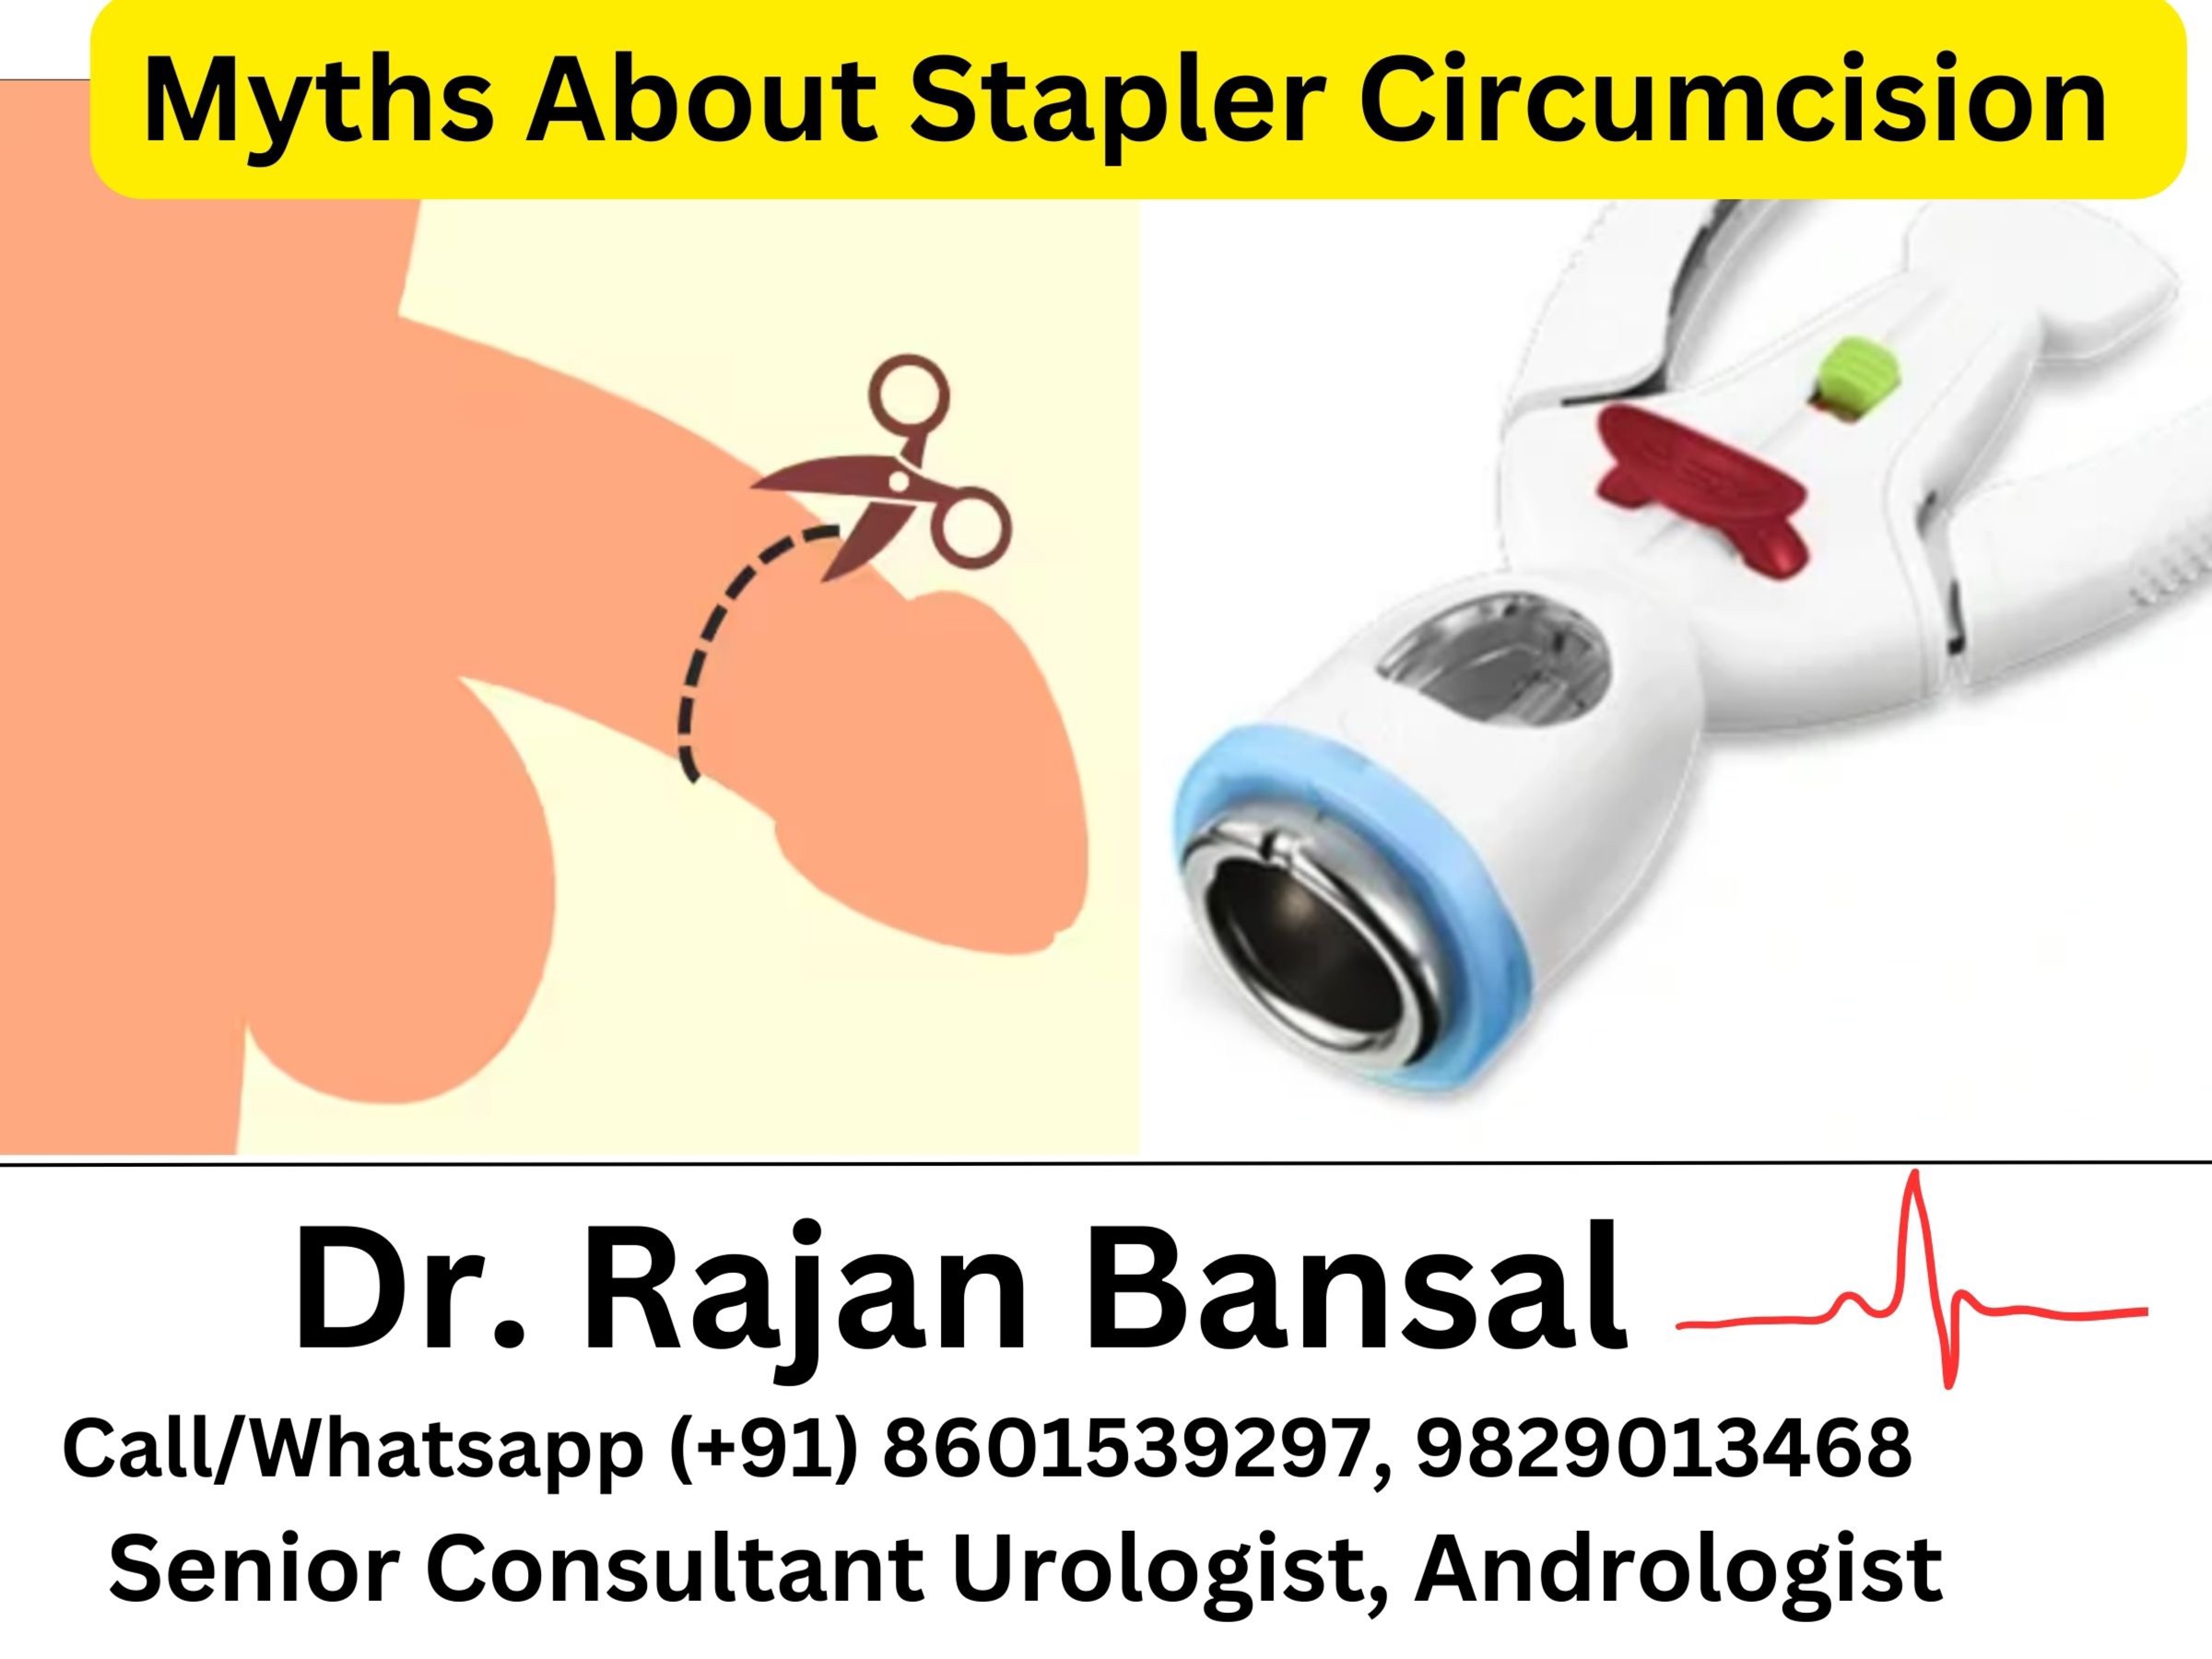 Myths About Stapler Circumcision- Separating Fact from Fiction Dr Rajan Bansal